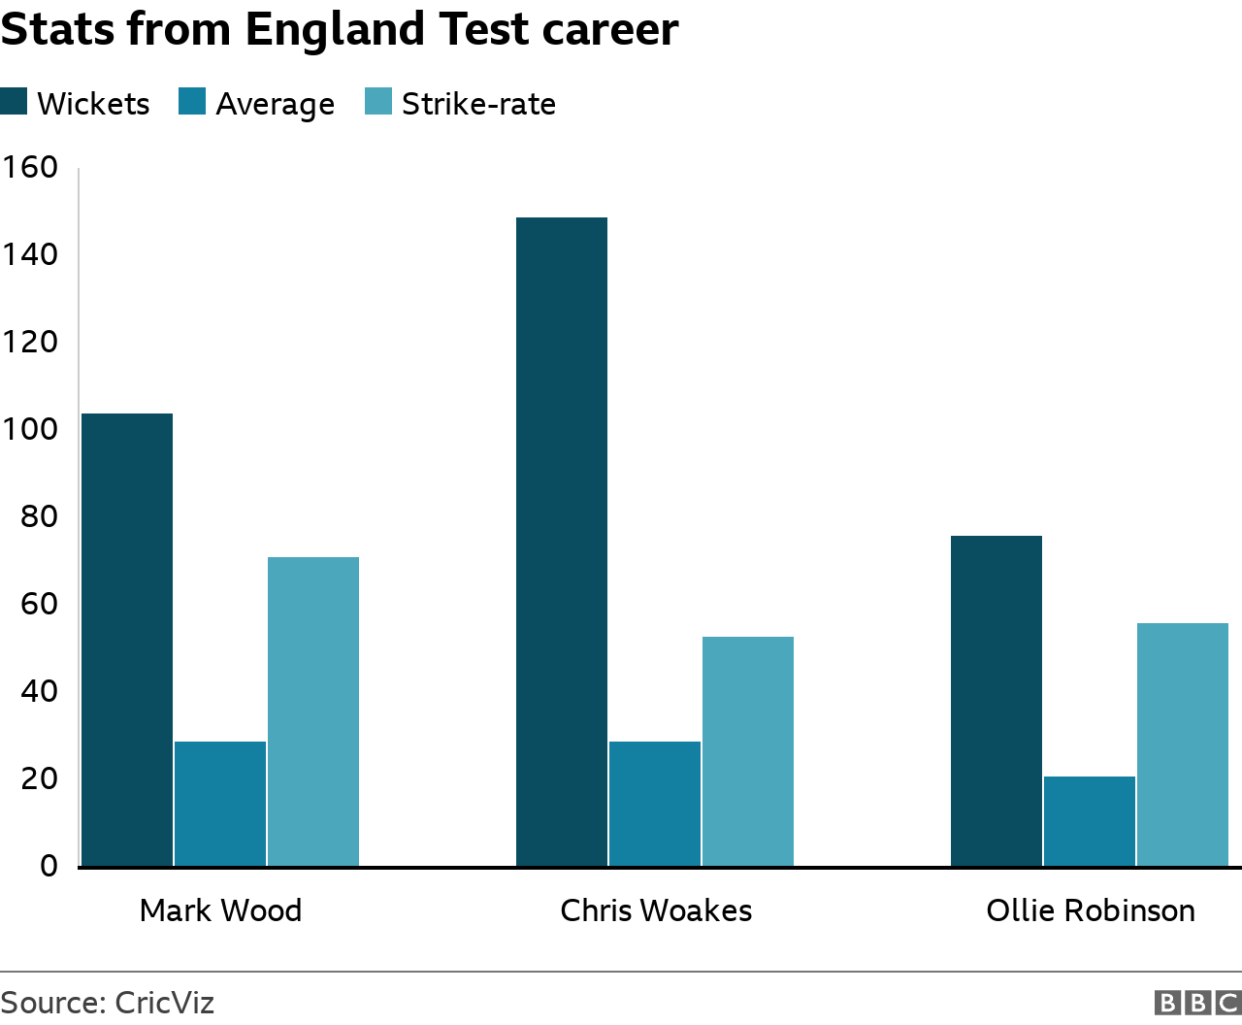 A grouped bar chart showing the following data from their England Test careers: Wickets - Wood 104, Woakes 149, Robinson 76; Average: Wood 28.96, Woakes 28.83, Robinson 21.05; Strike-rate: Wood 71.22, Woakes 53.06, Robinson 55.78